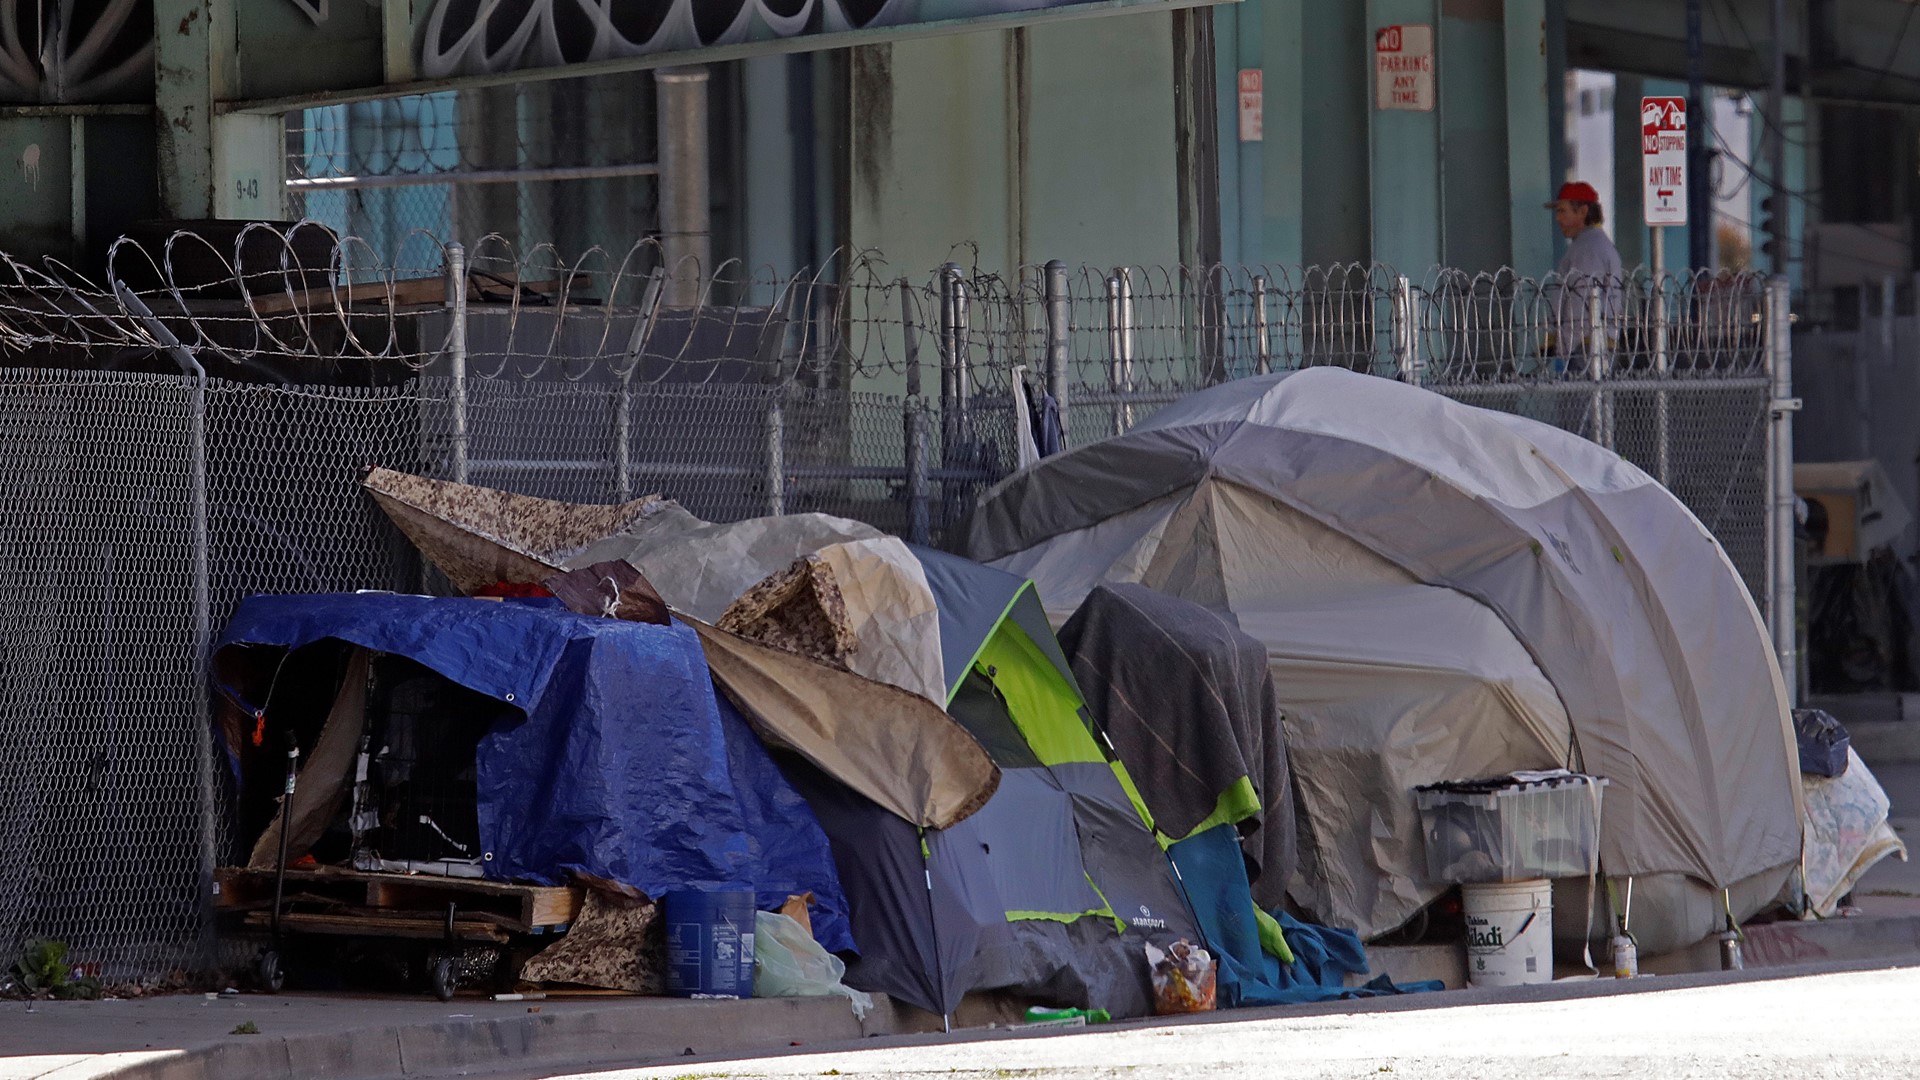 Sacramento Mayor Darrell Steinberg said preventing people from becoming homeless in the first place is what makes addressing the crisis so difficult.